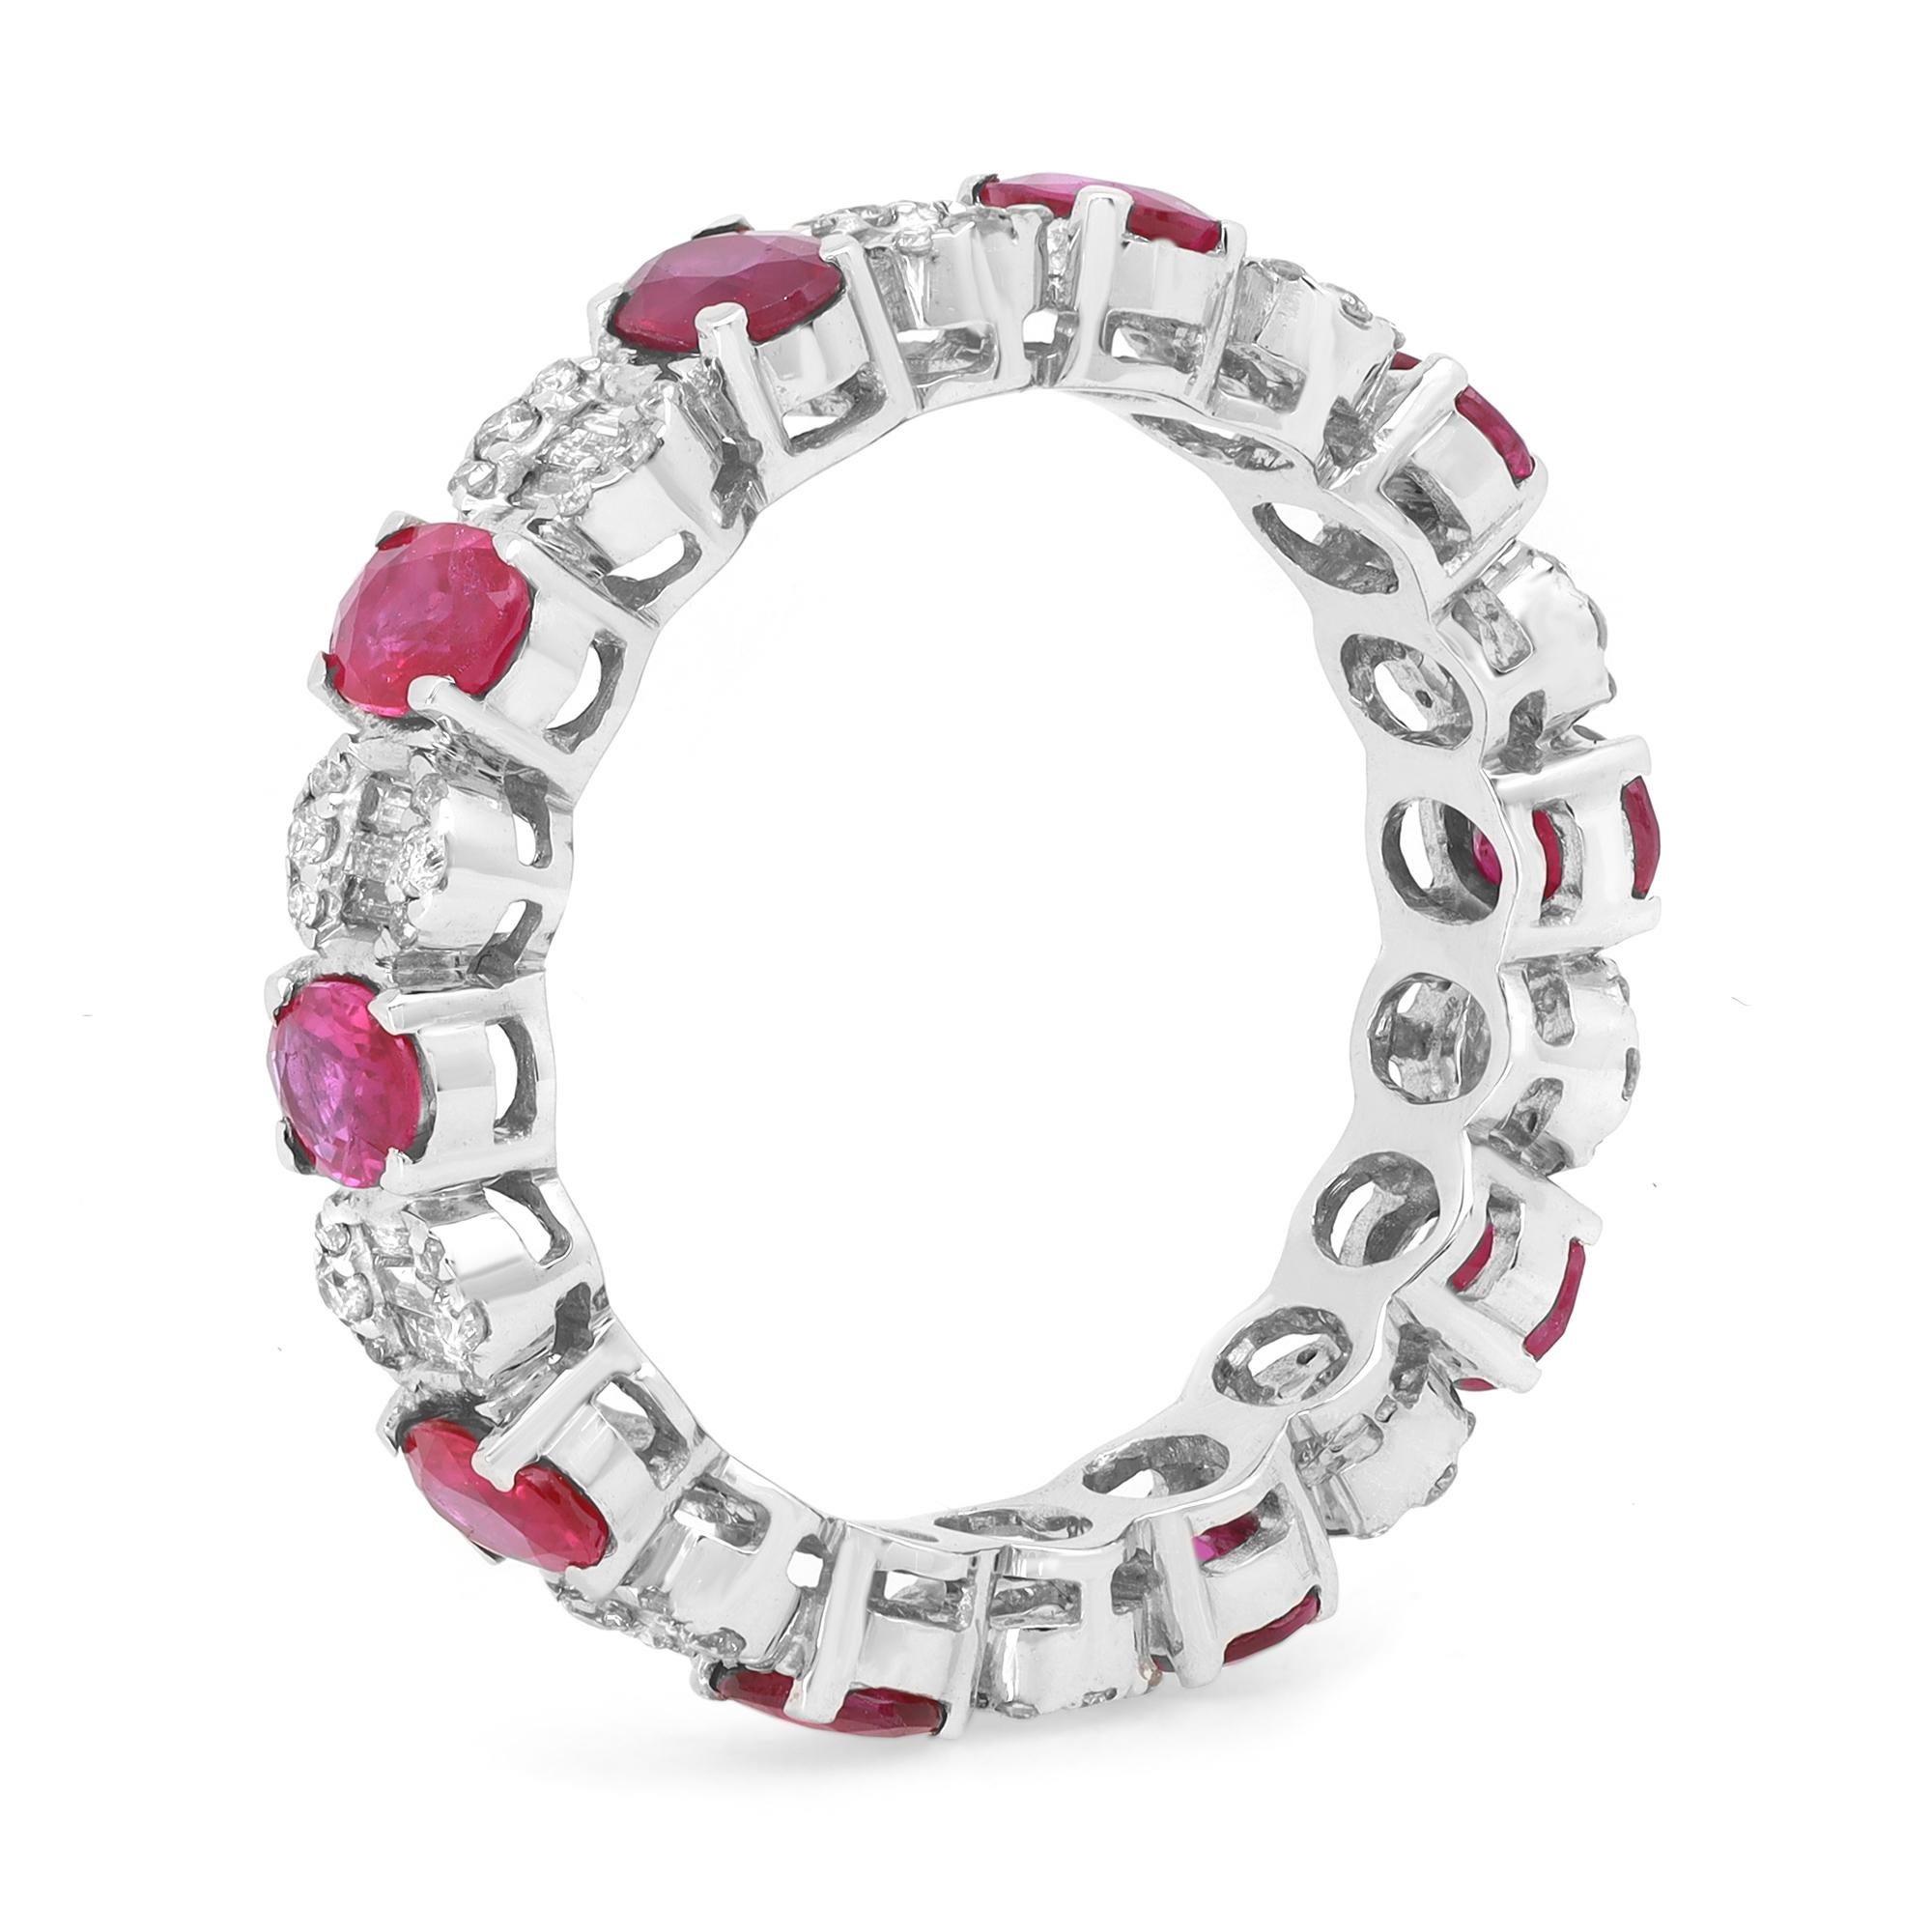 This stunning eternity band features 10 prong set oval cut rubies alternating with Baguette and Round Cut diamonds. The stones are beautifully circling all the way around the band and are set in fine 14k white gold. Ruby total carat weight: 1.83.